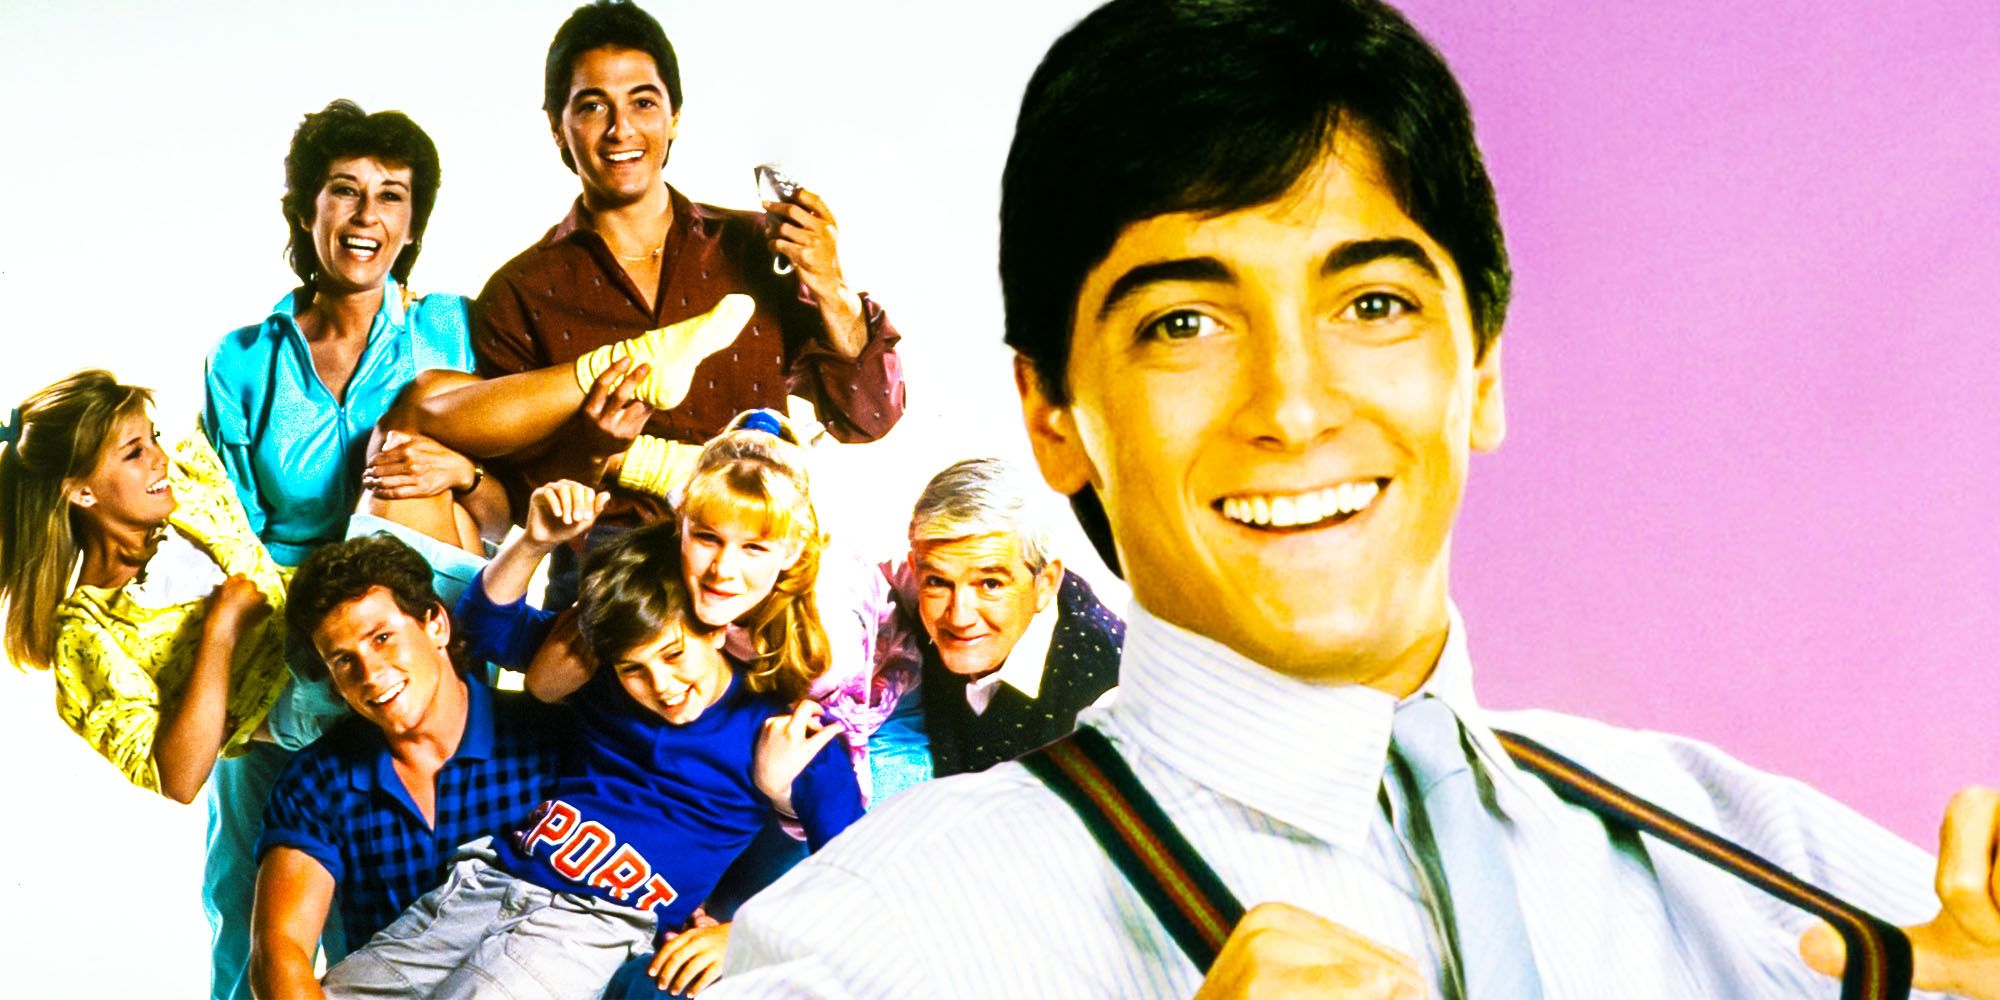 The Charles in Charge cast